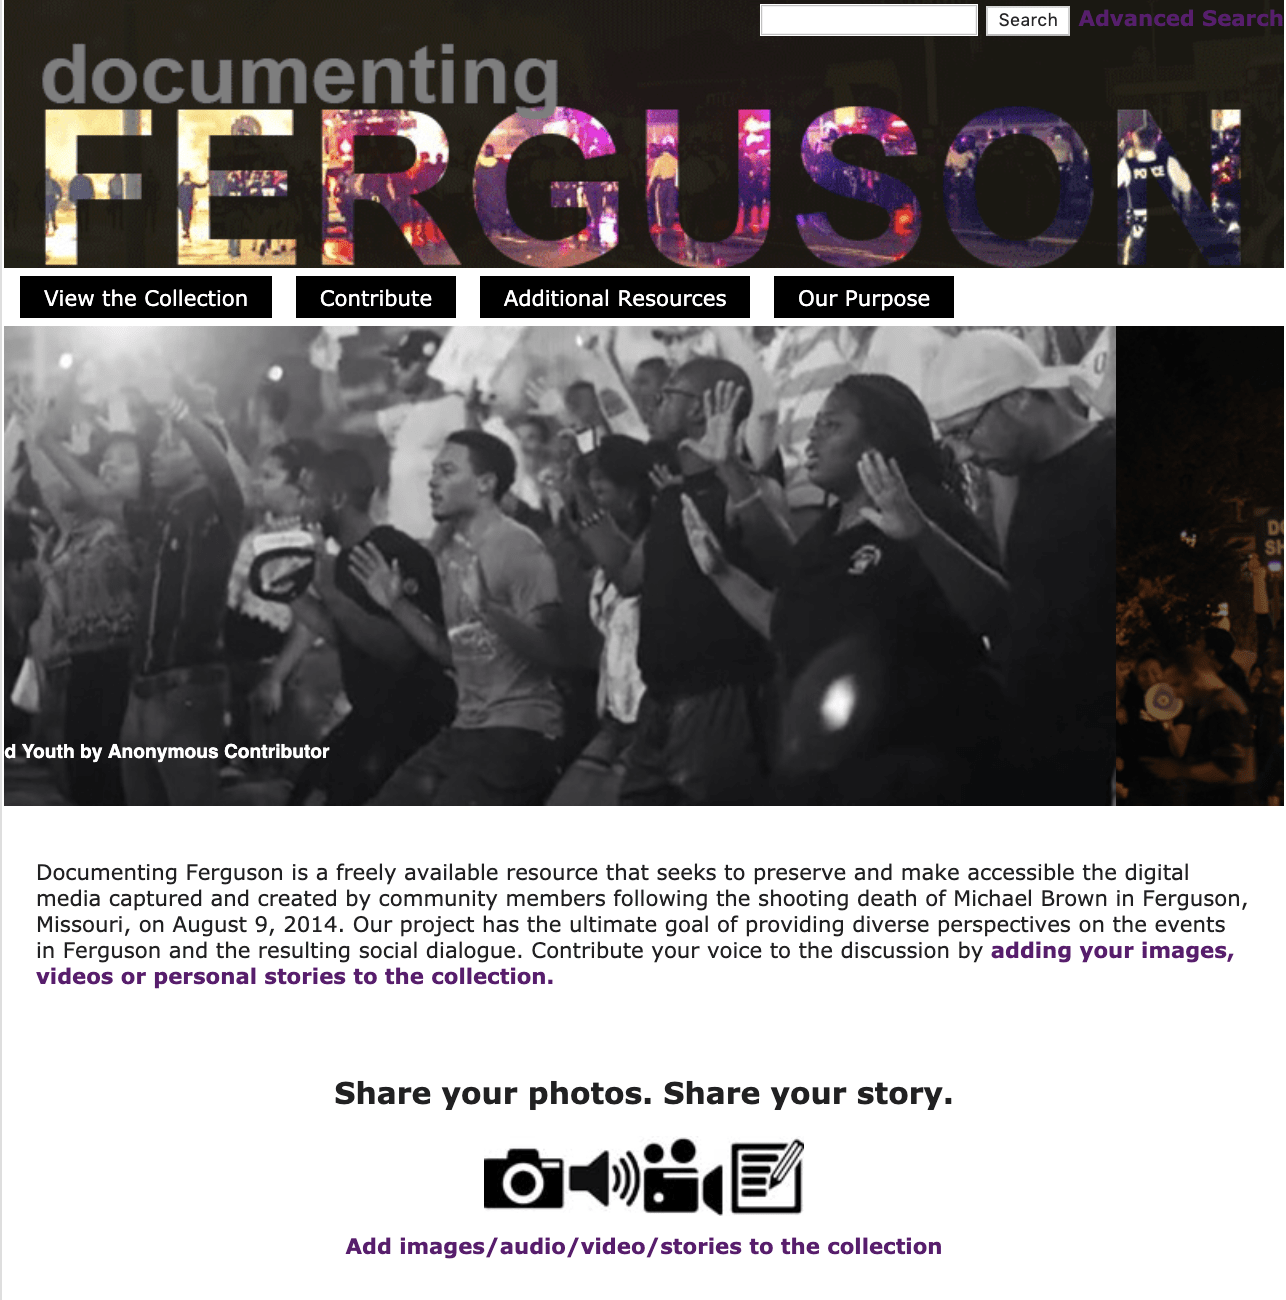 screenshot of Documenting Ferguson website - people at a protest